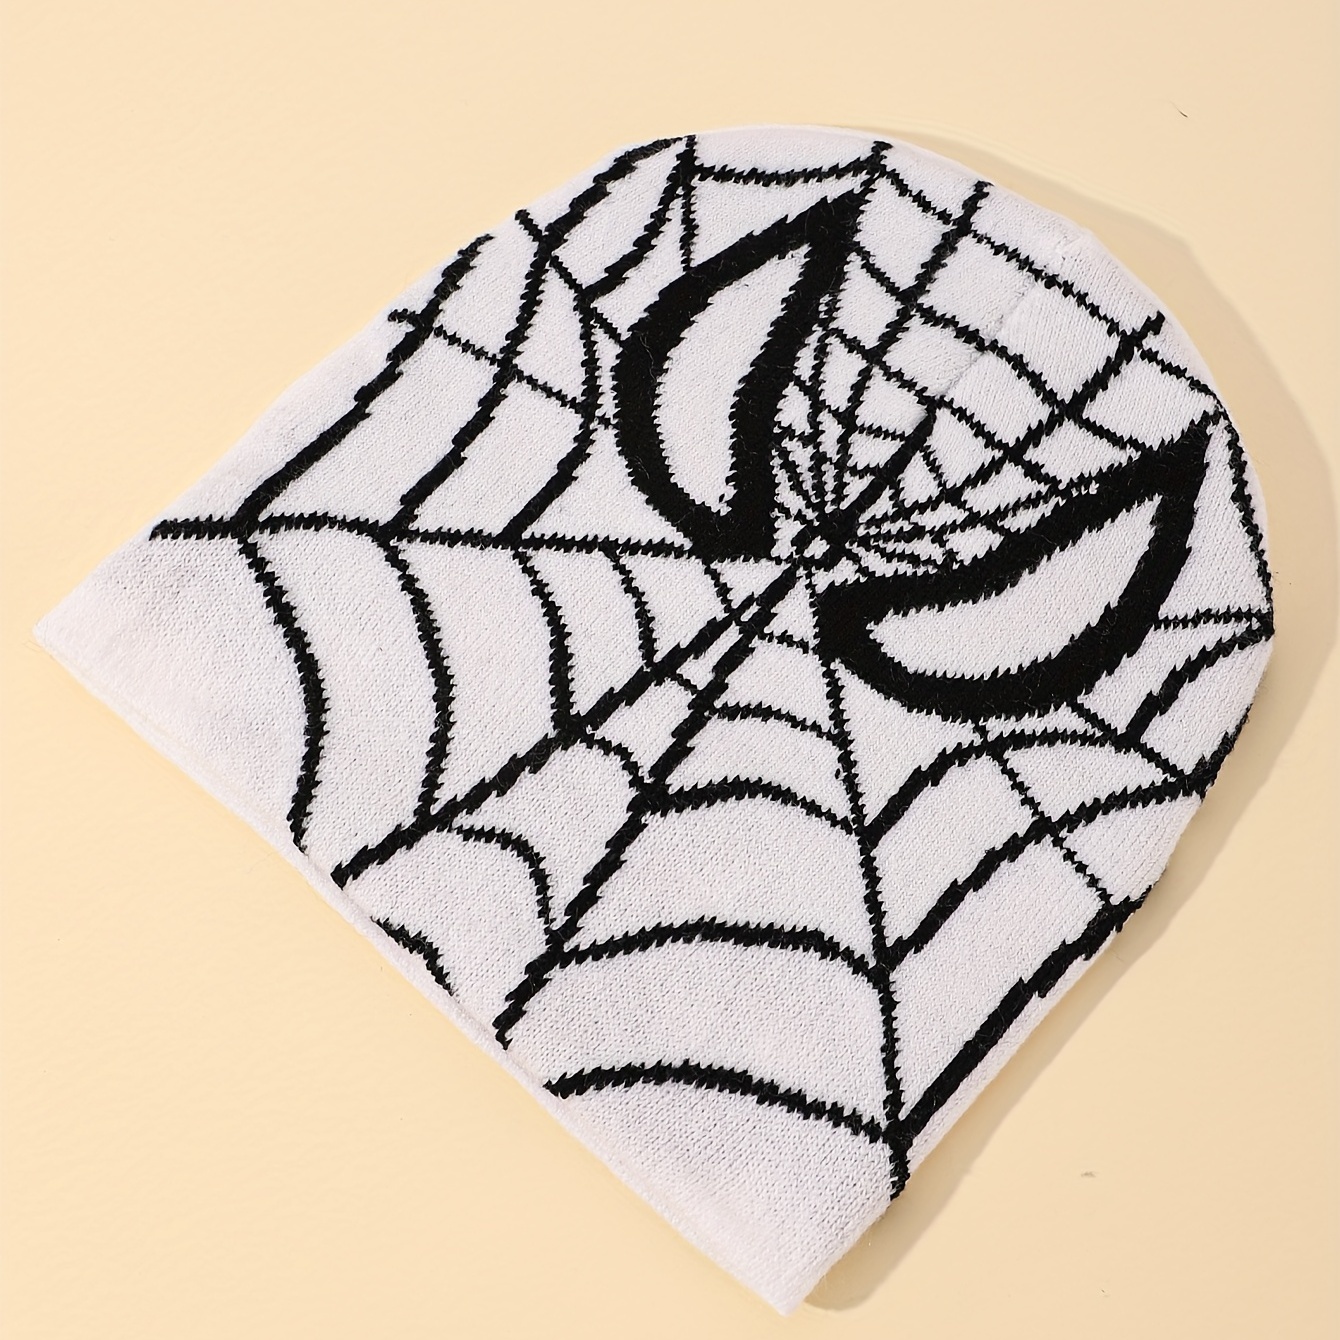 The Amazing Spider-Man Face Embroidered Patch A -new 